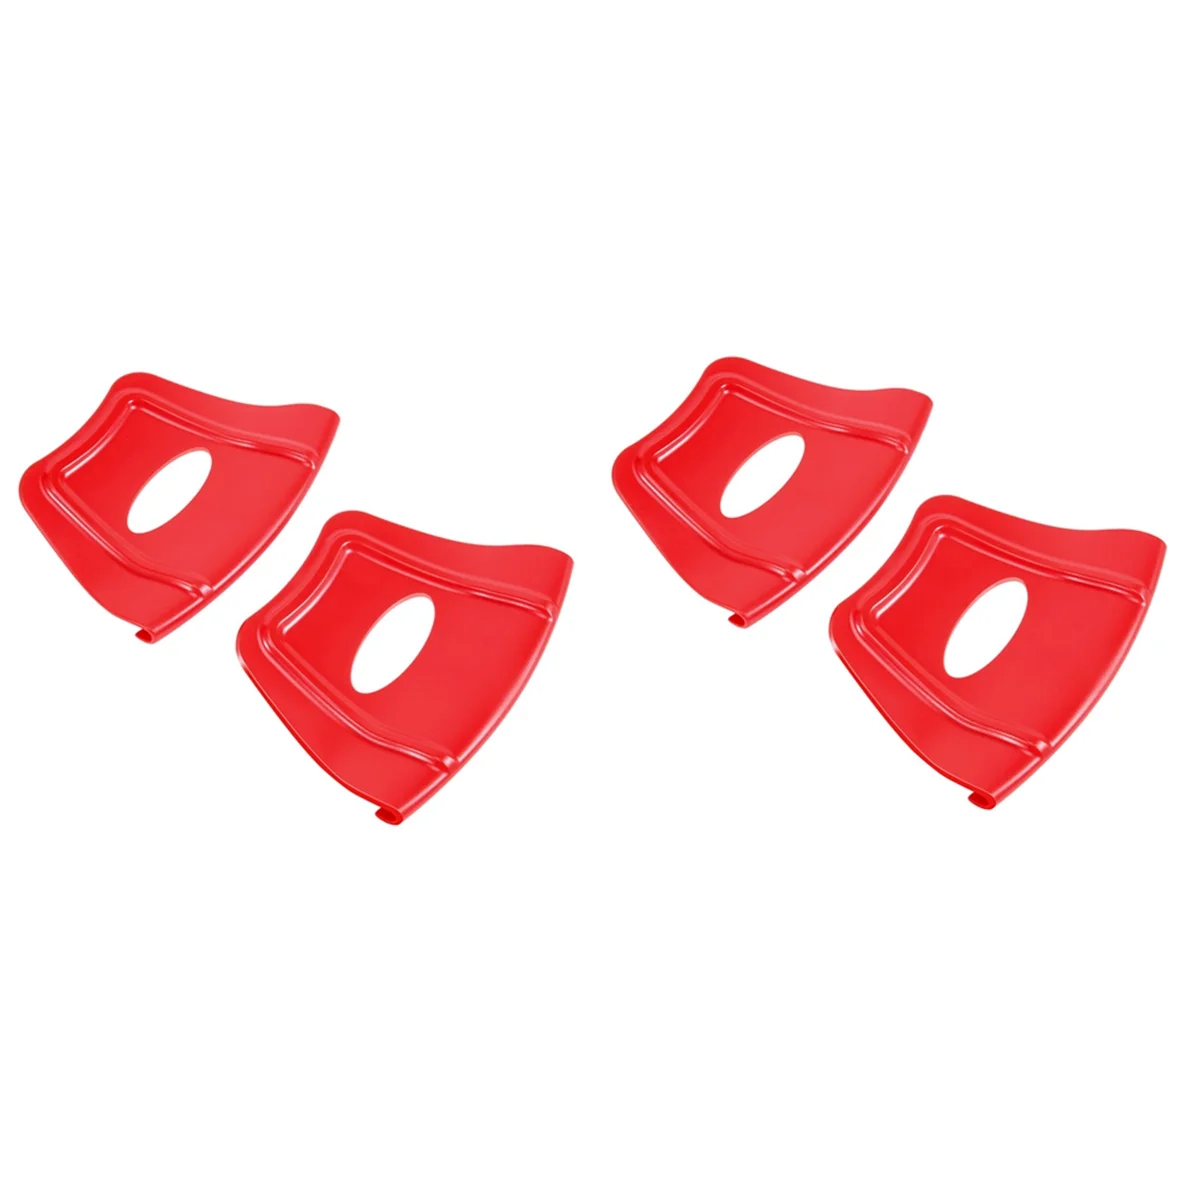 

4PCS Rim Protectors Rim Shields Guards, Wheel and Tire Tool for ATV Quad Motorcycle Tyre Tire Installation